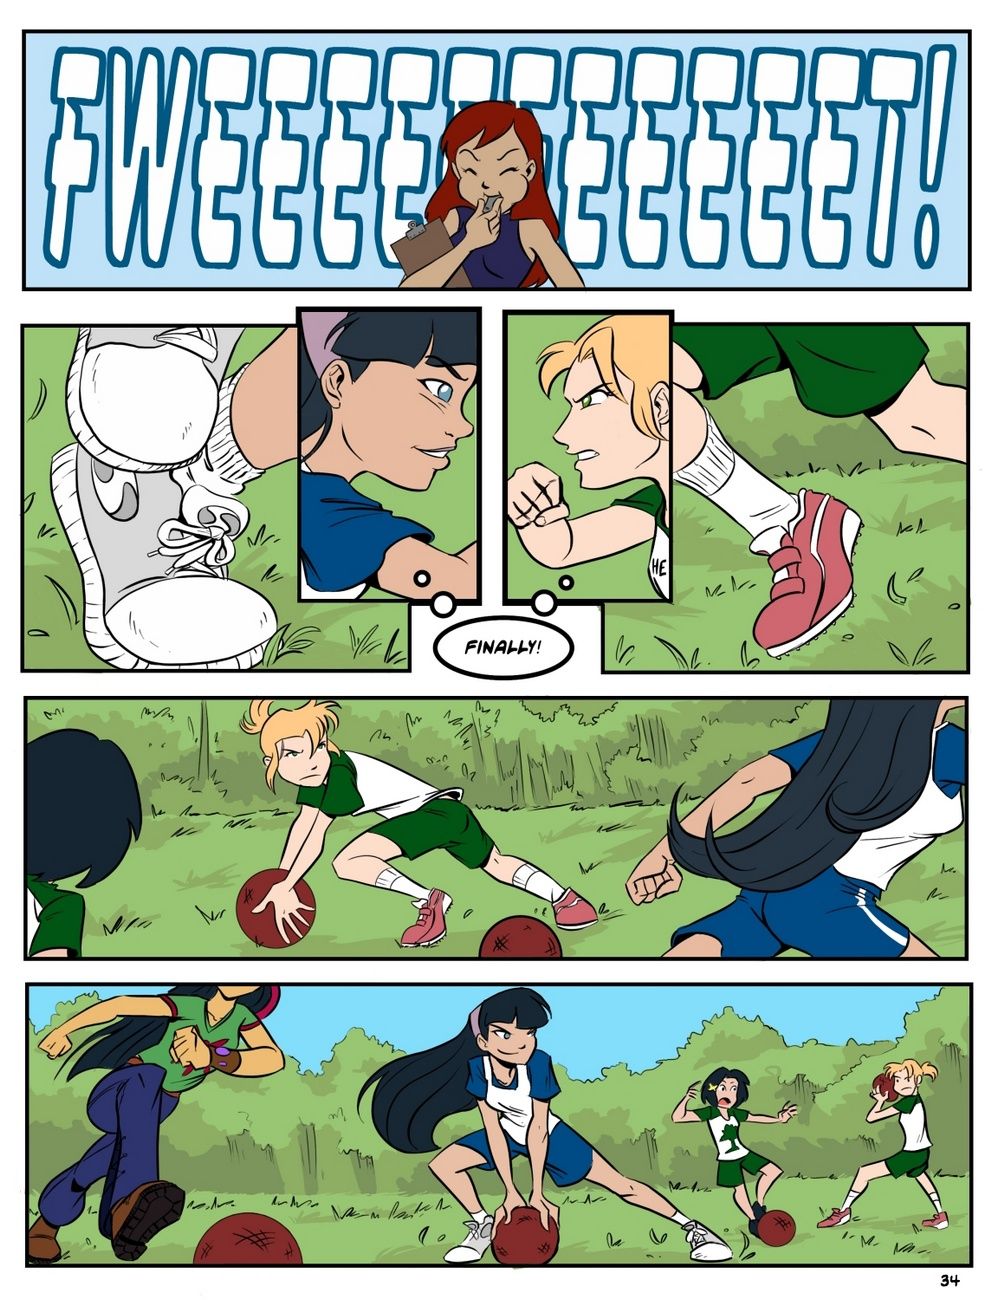 Camp Sherwood [Mr.D] (Ongoing) page 35